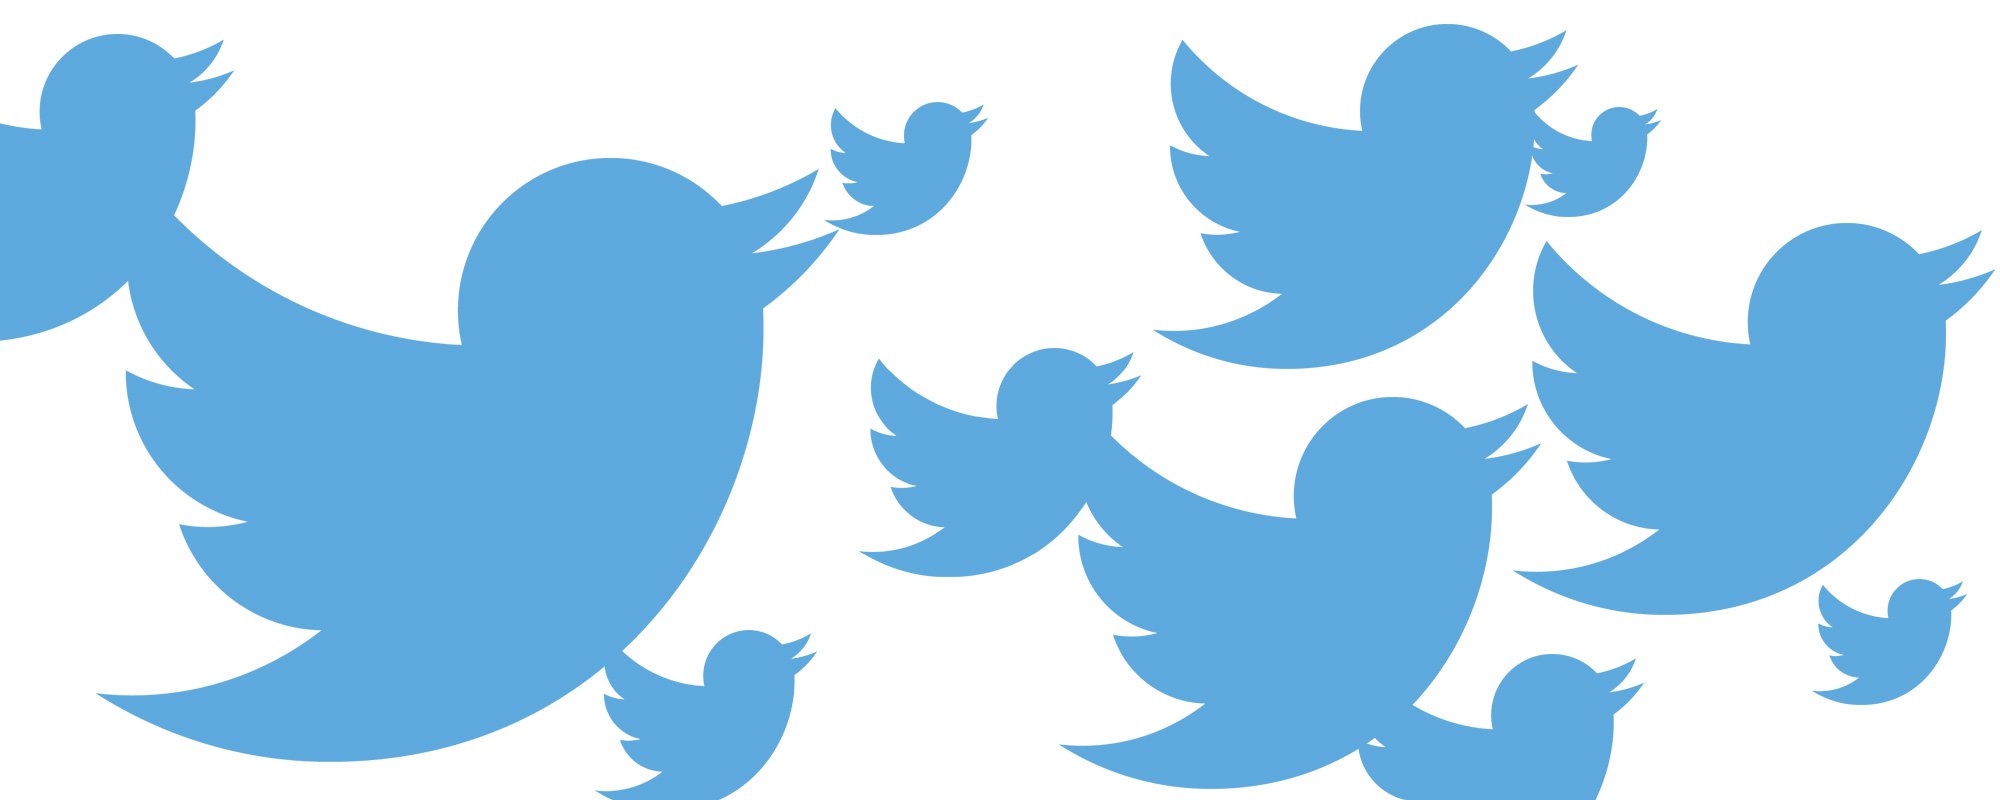 Passwords 336 million Twitter users have been compromised due to a bug